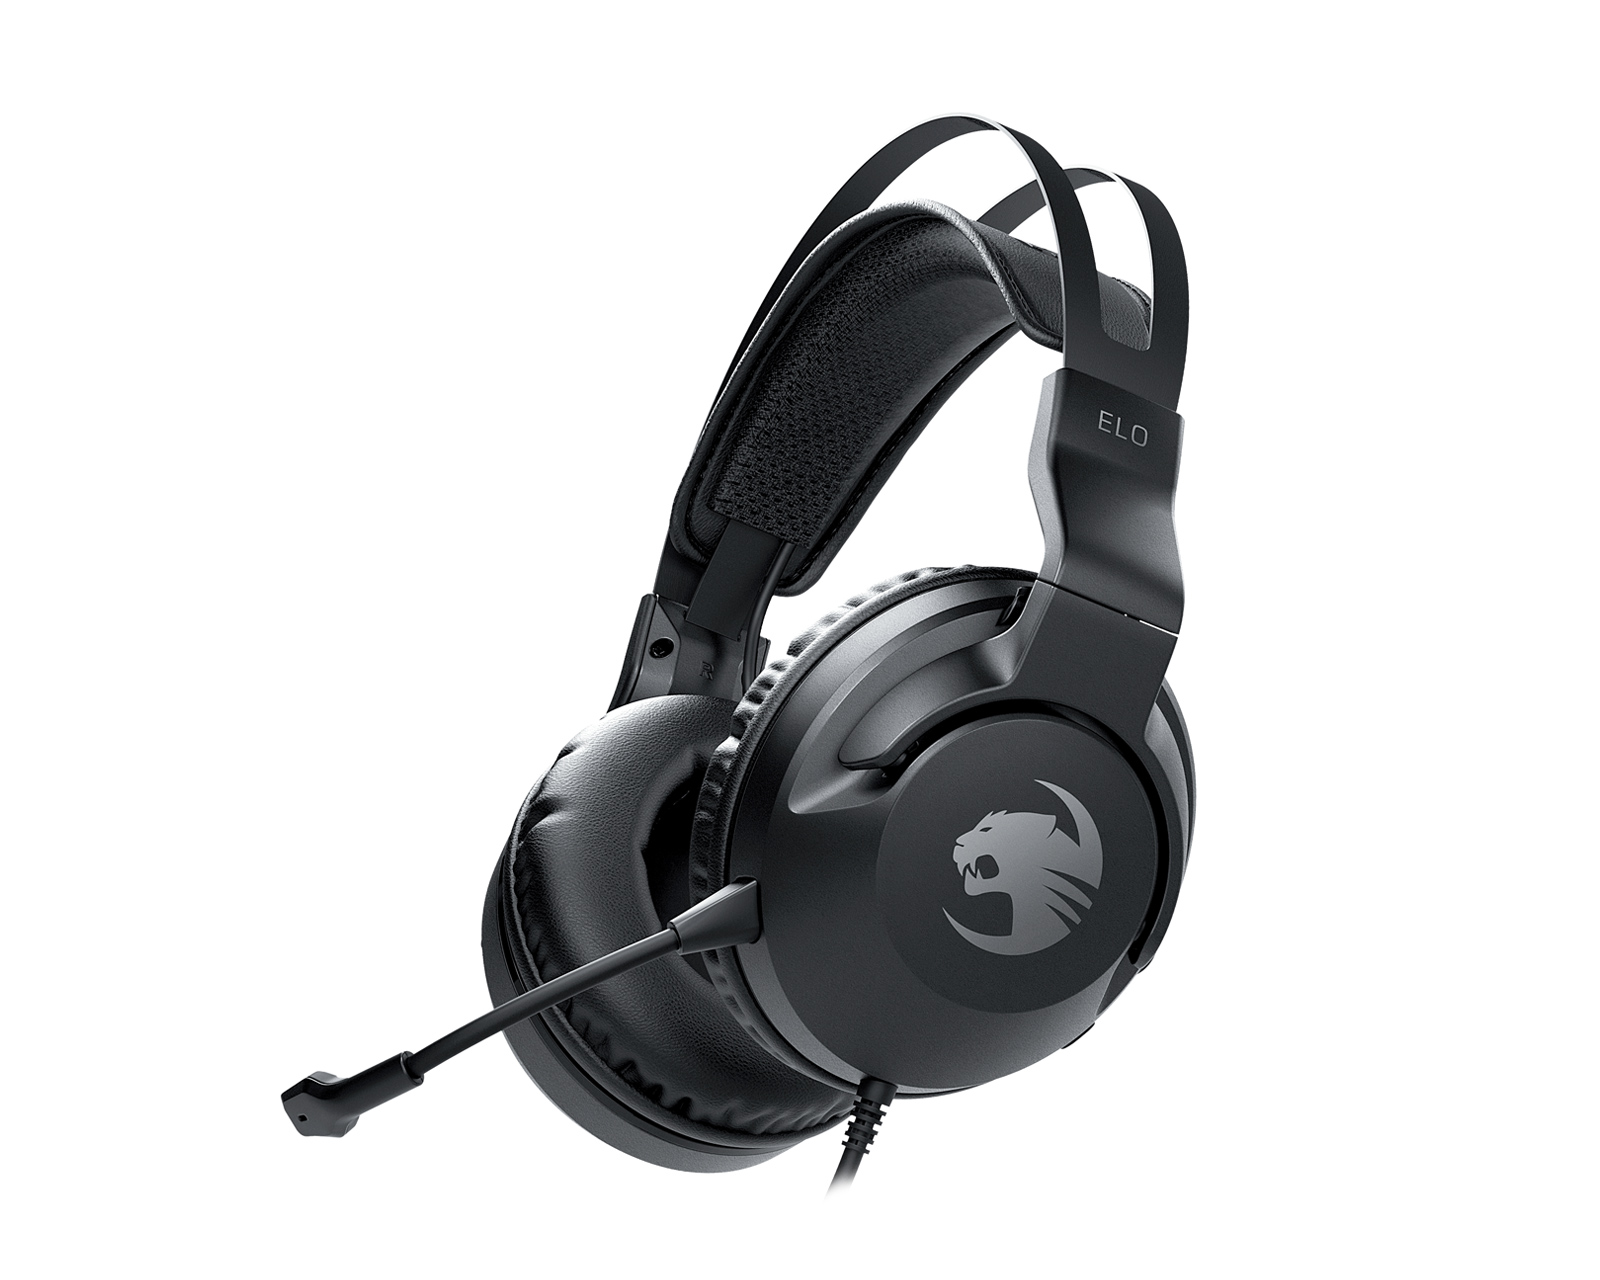 koffie Misbruik zout Roccat ELO X STEREO Headset - us.MaxGaming.com